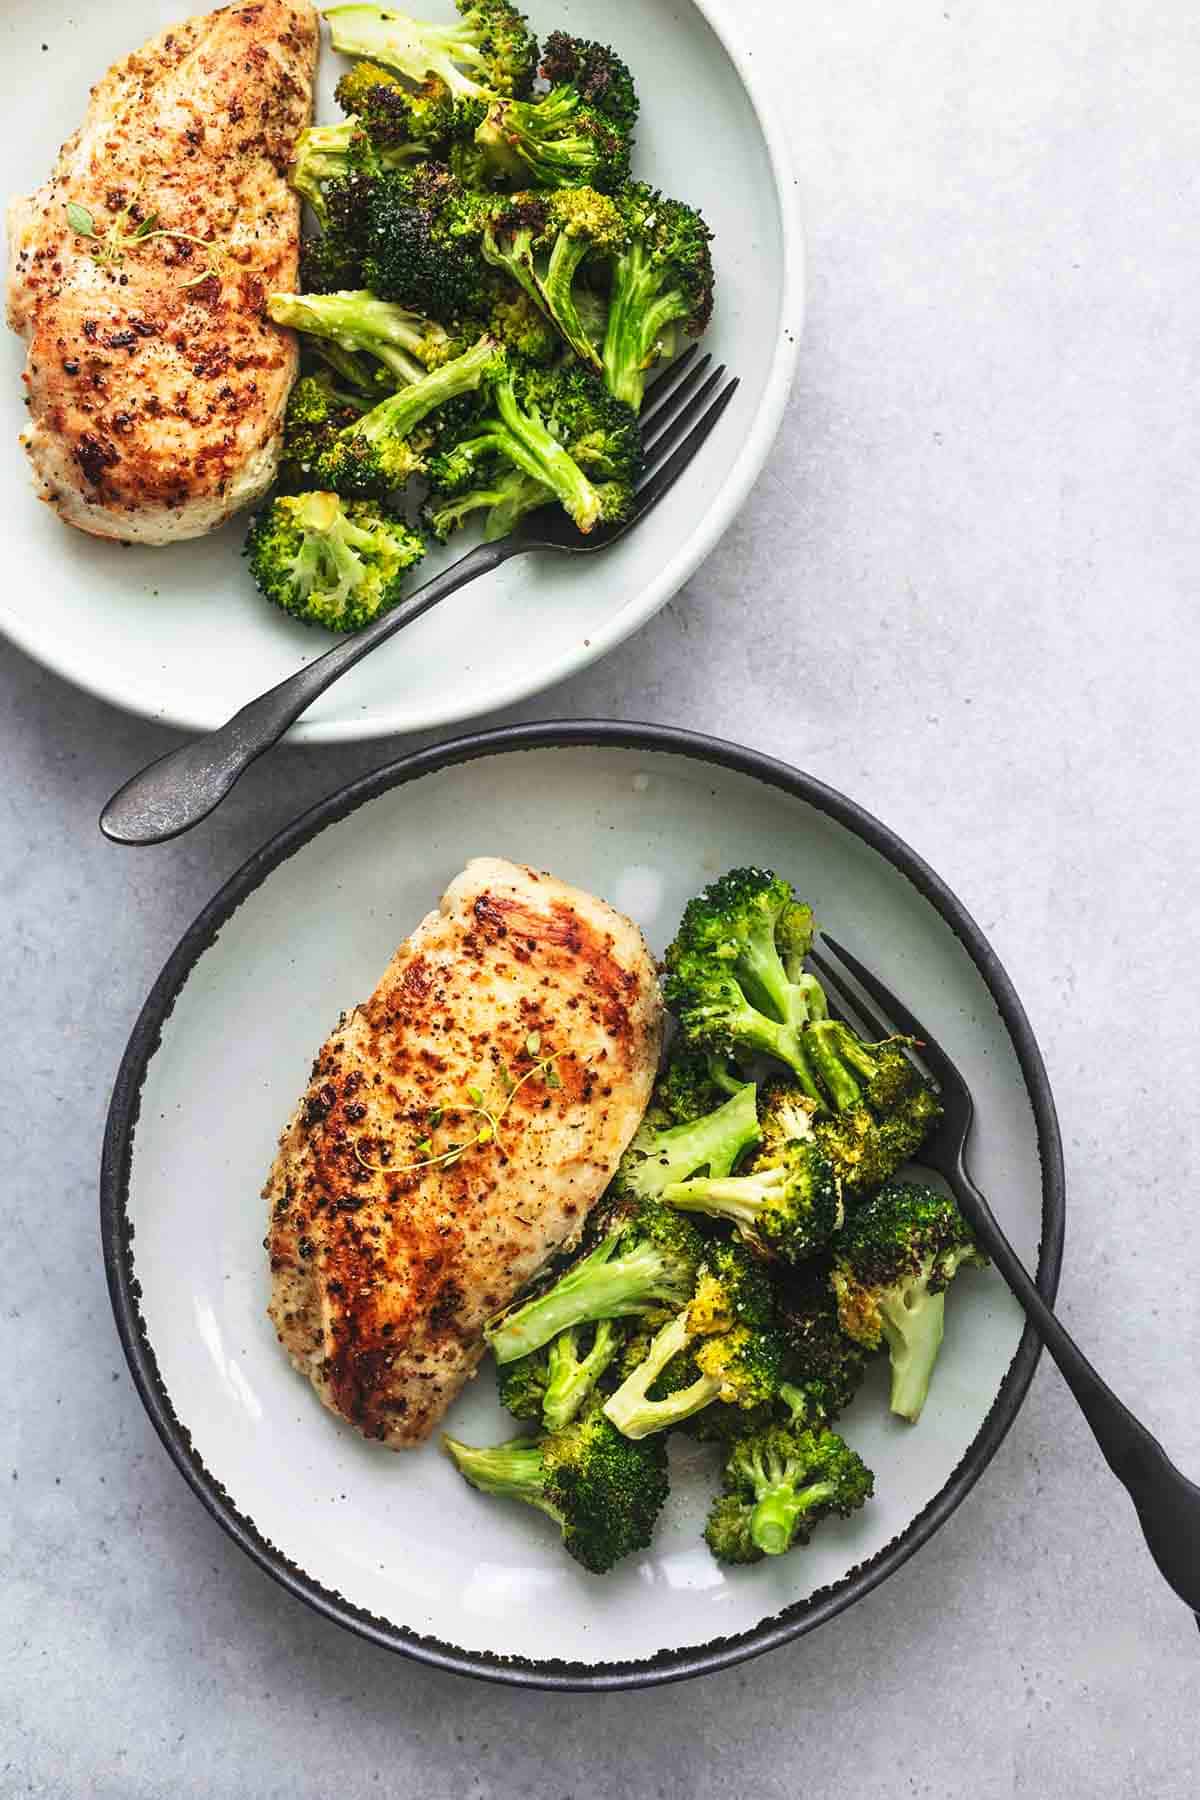 top view of two plates with chicken and broccoli skillet on them.